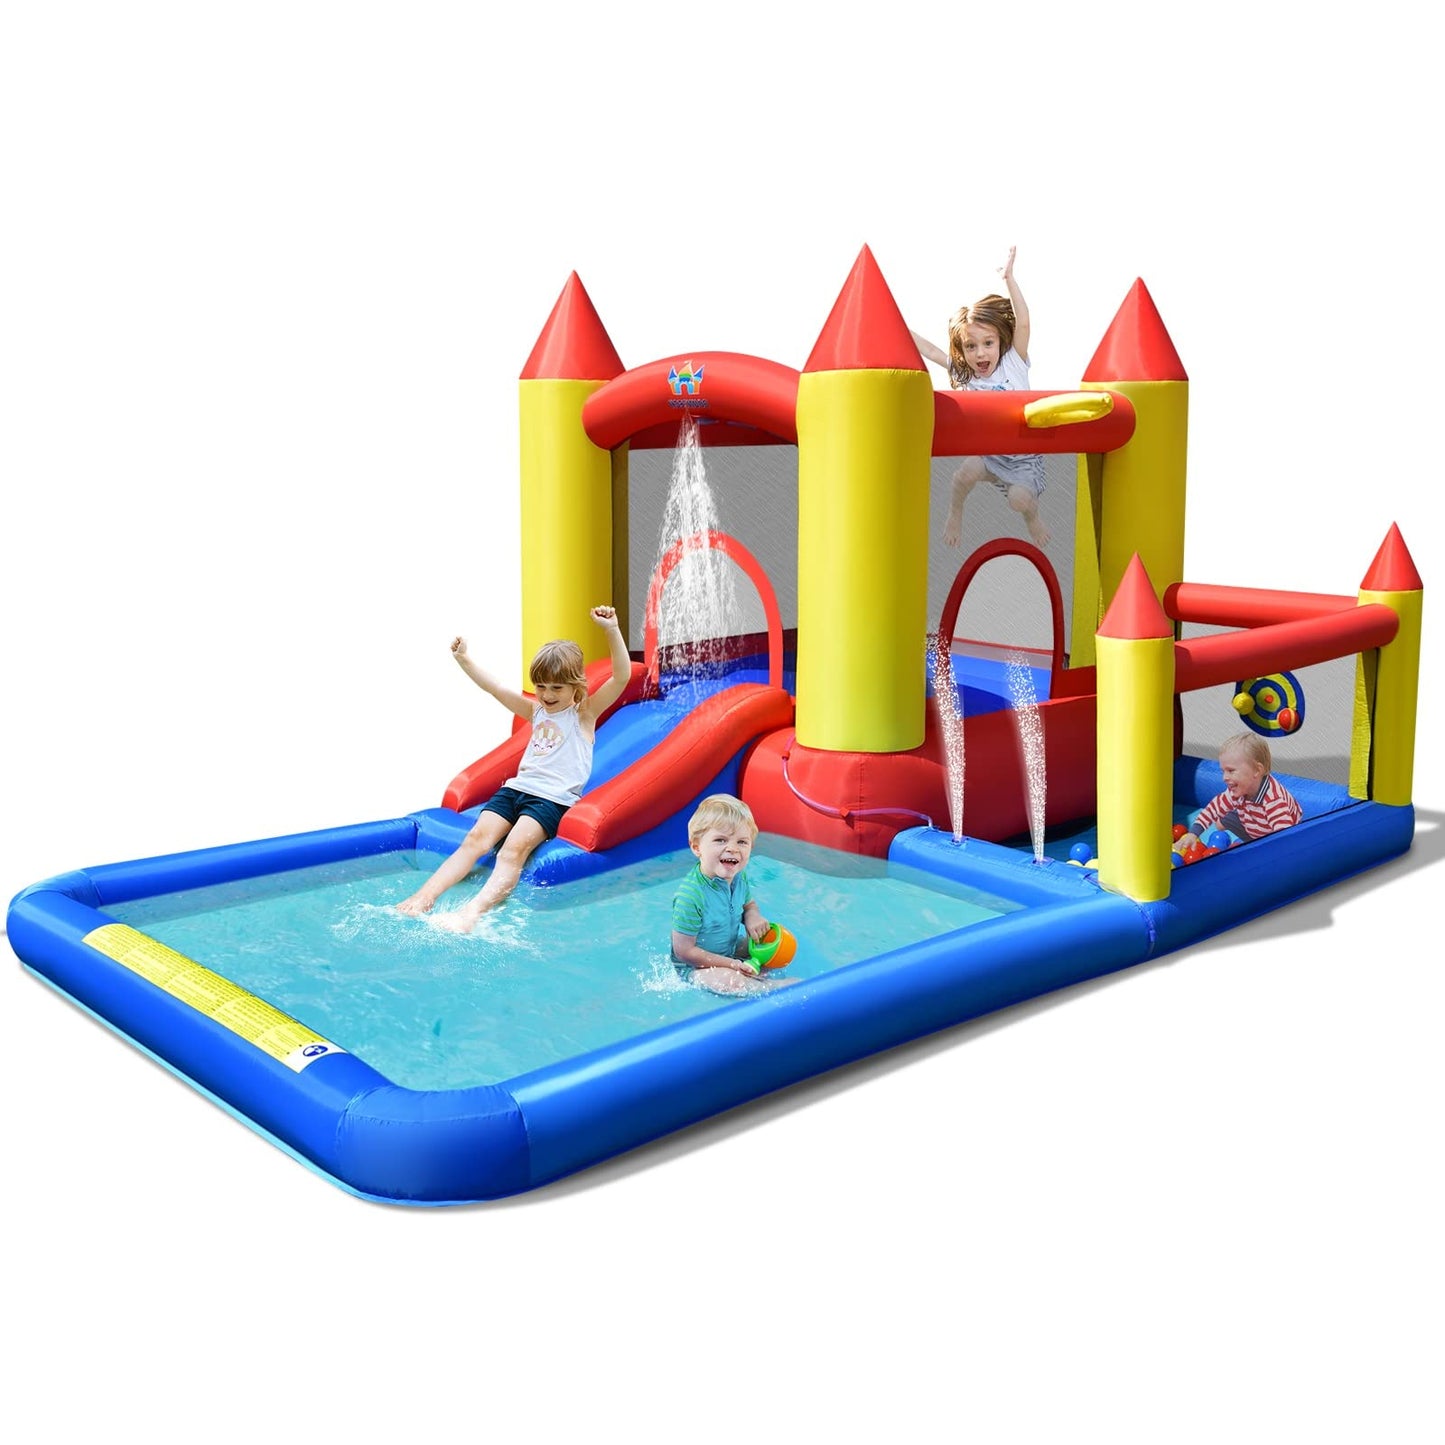 BOUNTECH Inflatable Water Bounce House, Giant Waterslide Park for Kids Backyard Fun Wet and Dry w/Splash Pool, Blow up Water Slides Inflatables for Kids and Adults Outdoor Party Gifts Castle without 480W Air Blower